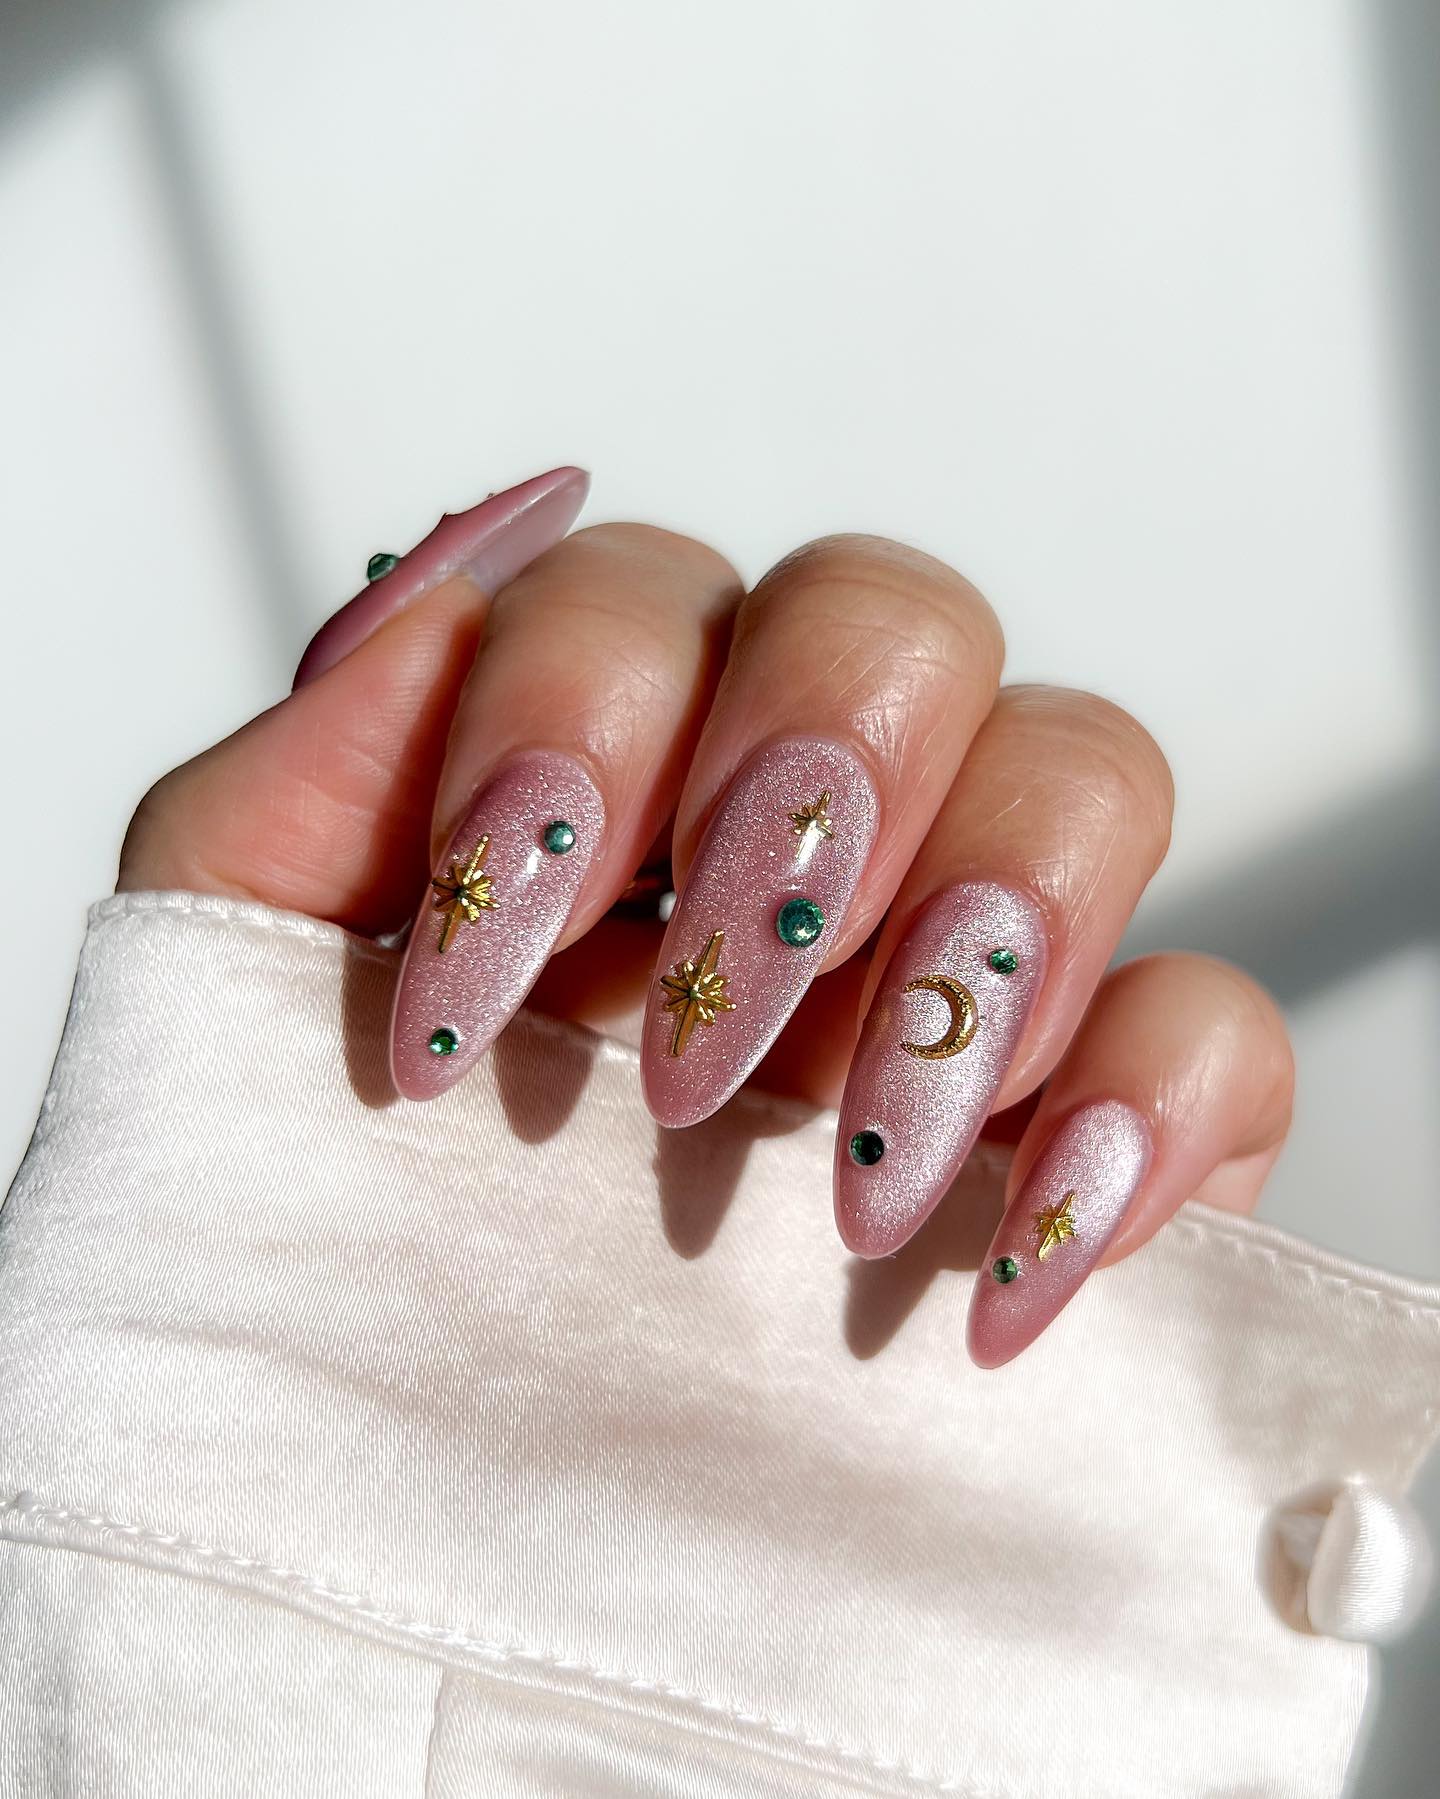 100 Of The Best Spring Inspired Nail Designs images 90